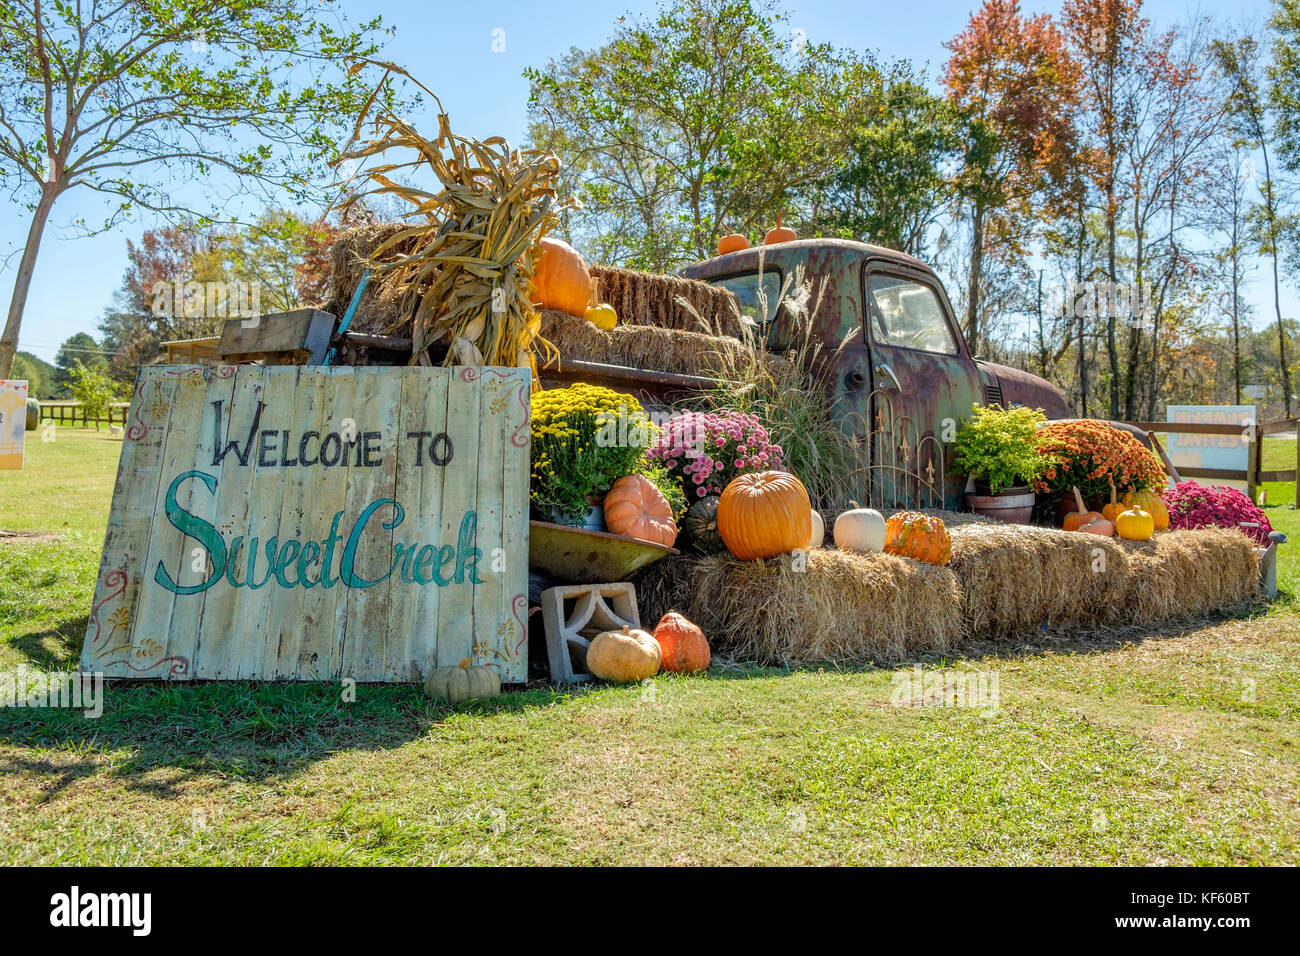 Fall or autumn display of pumpkins, gourds and flowers for the Halloween and Thanksgiving holidays at Sweet Creek Market, Pike Road Alabama, USA. Stock Photo